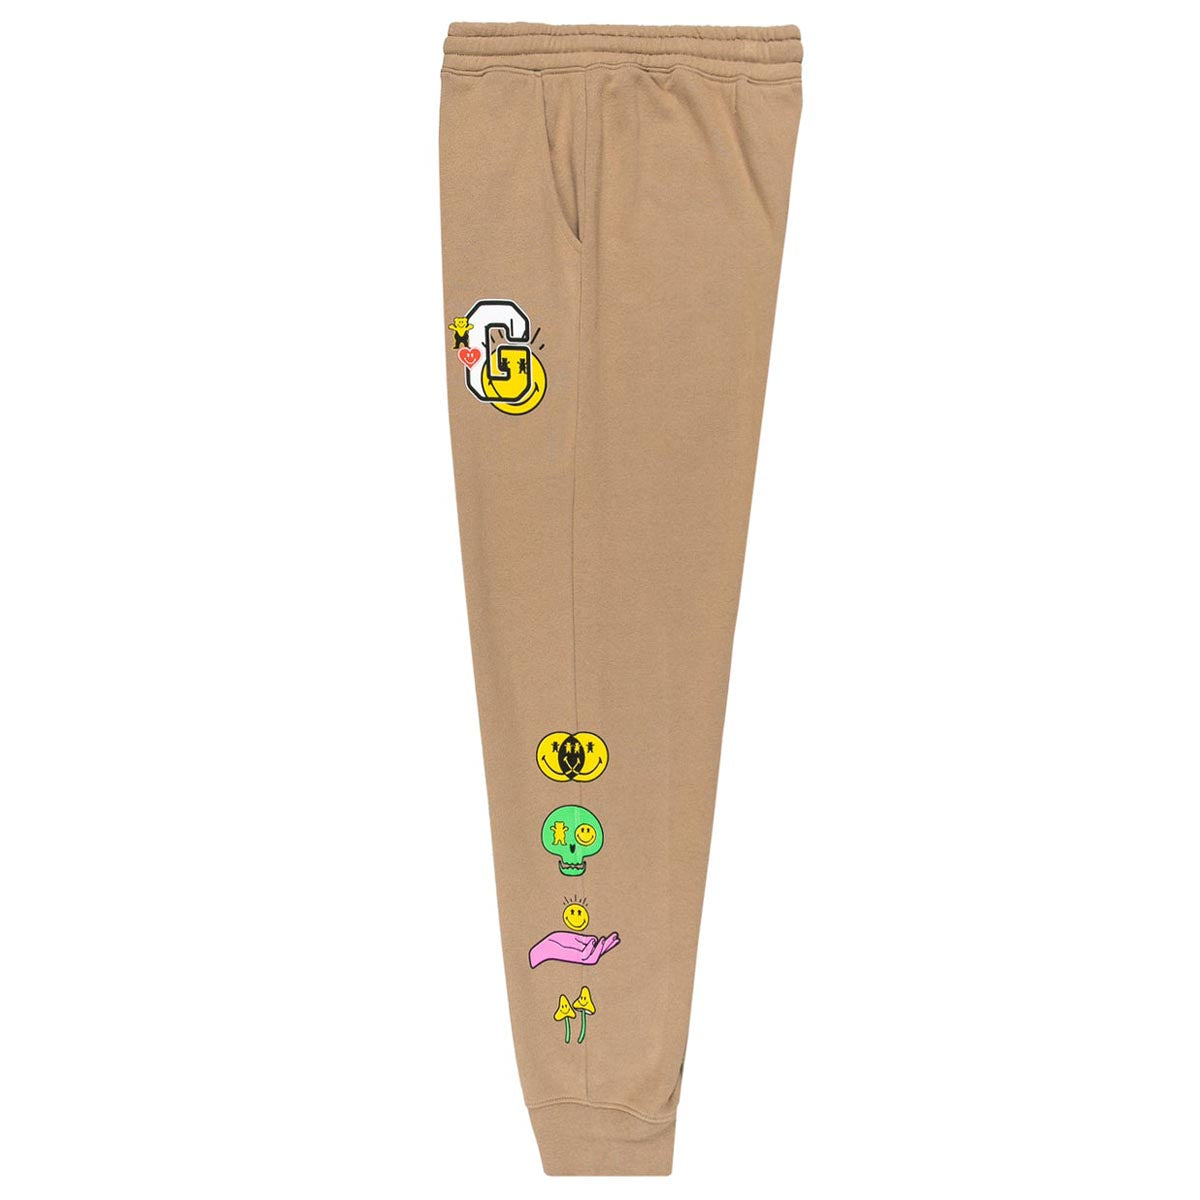 Grizzly x Smiley World Sweat Pants - Tan image 2